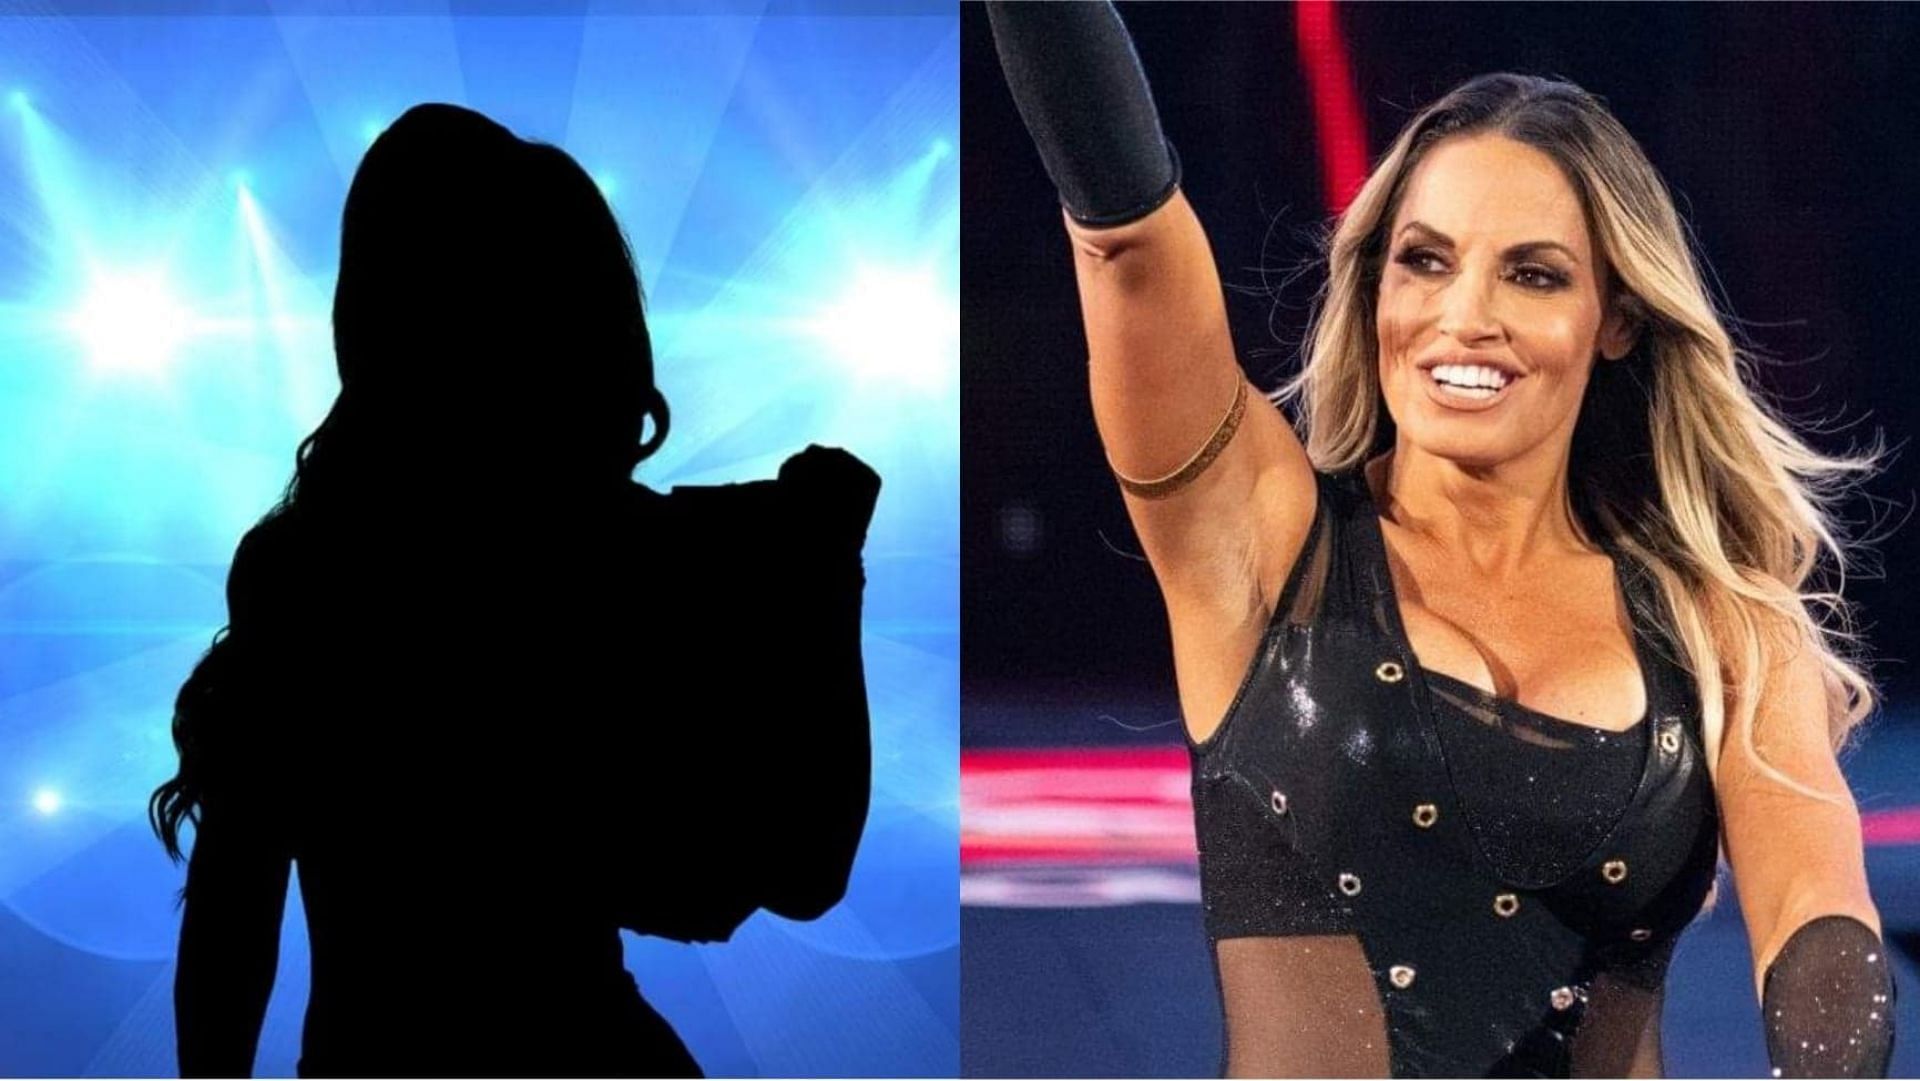 Trish Stratus is one of the greatest female wrestlers of all time!